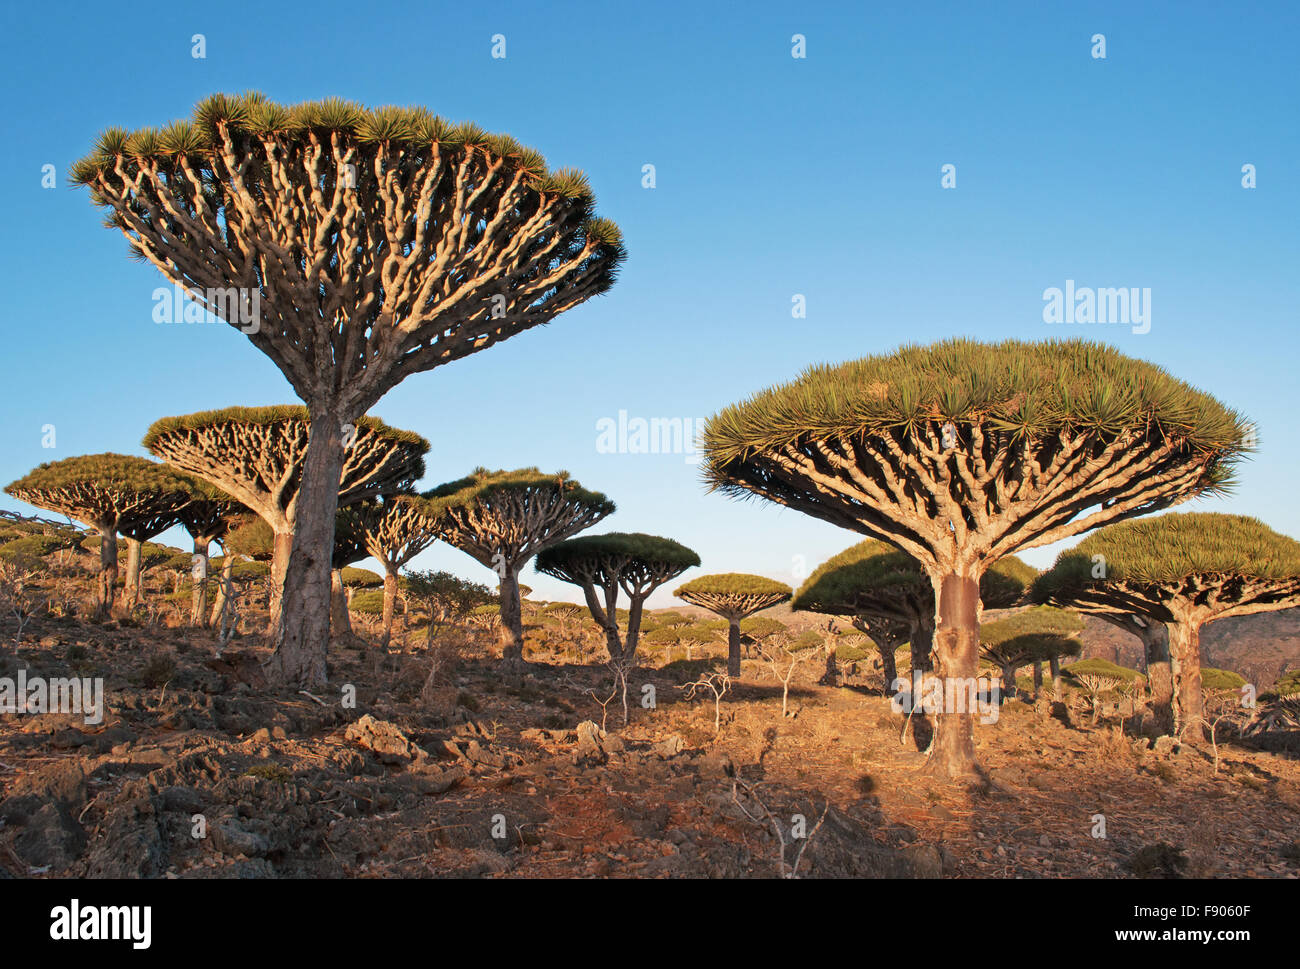 Yemen Middle East Red Rocks And Dragon Blood Trees Forest At Sunset Stock Photo Alamy